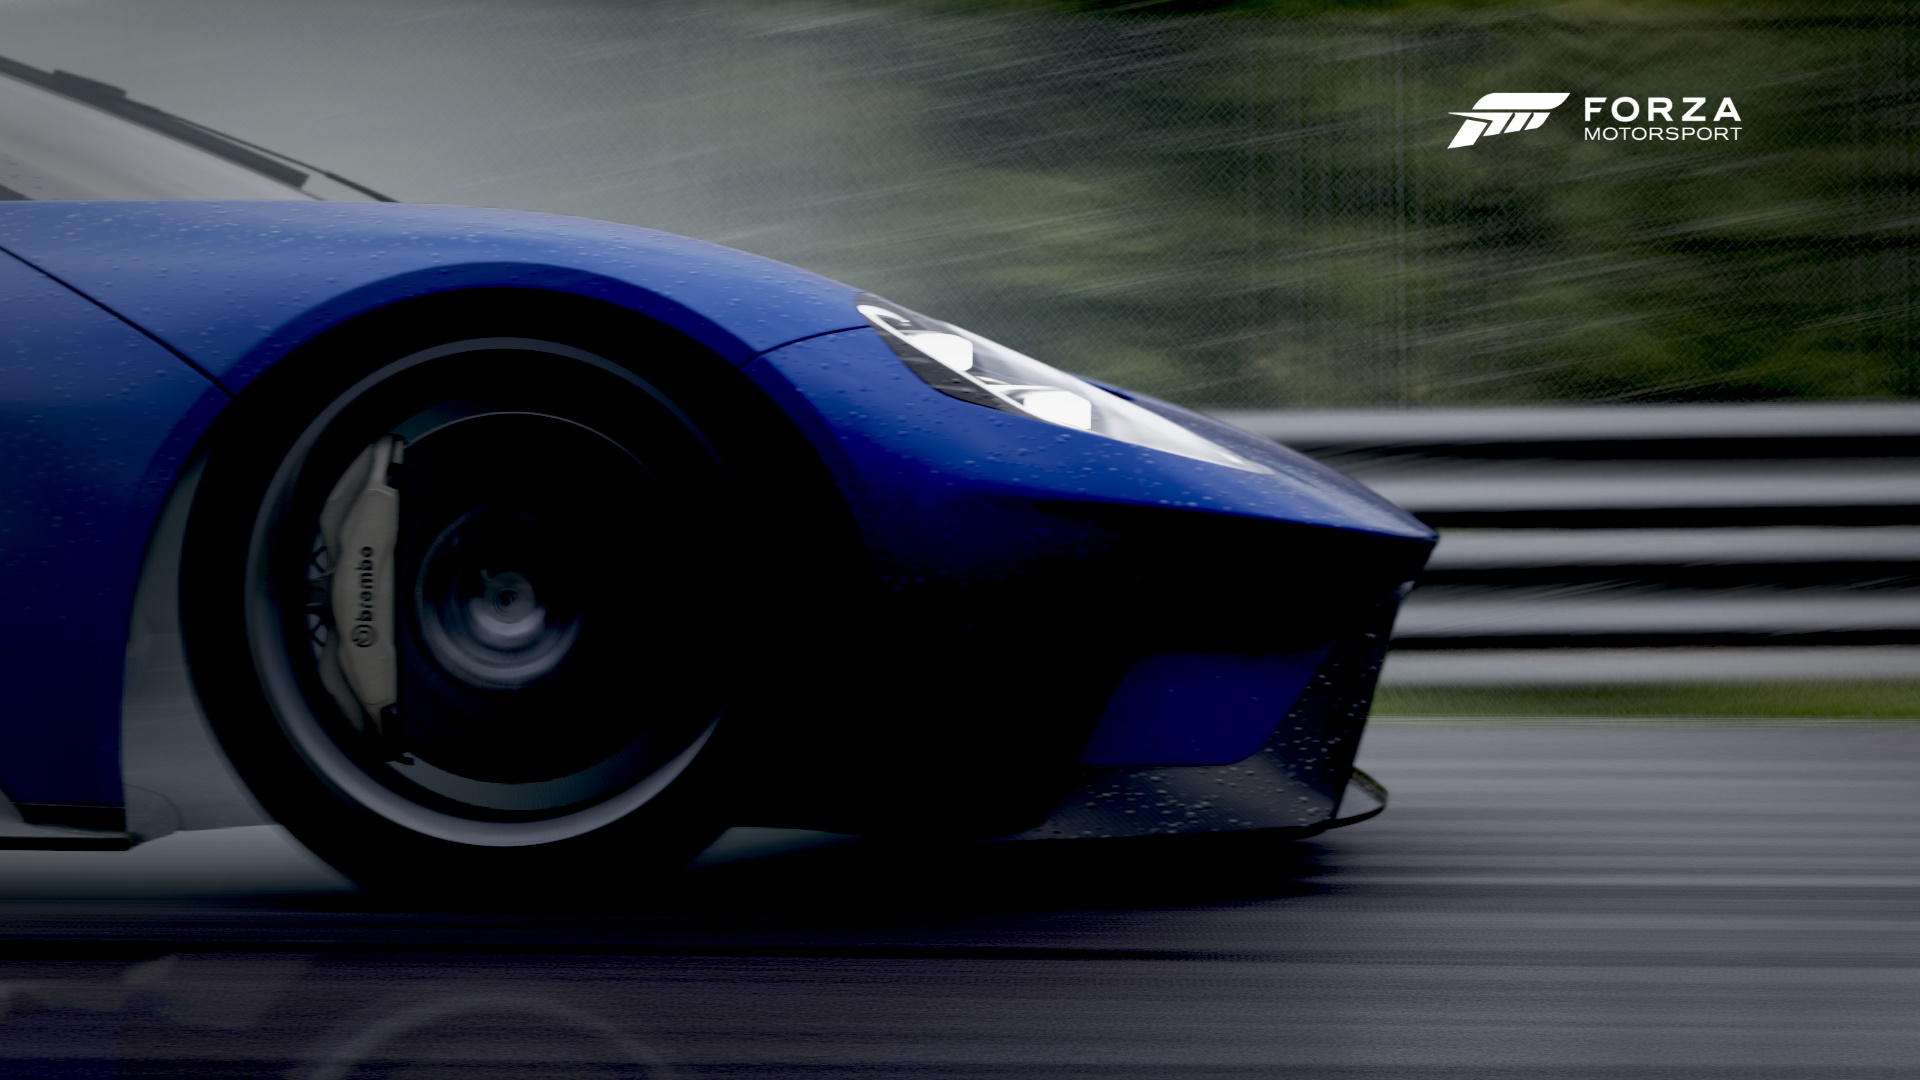 100+ Forza Motorsport 6 HD Wallpapers and Backgrounds